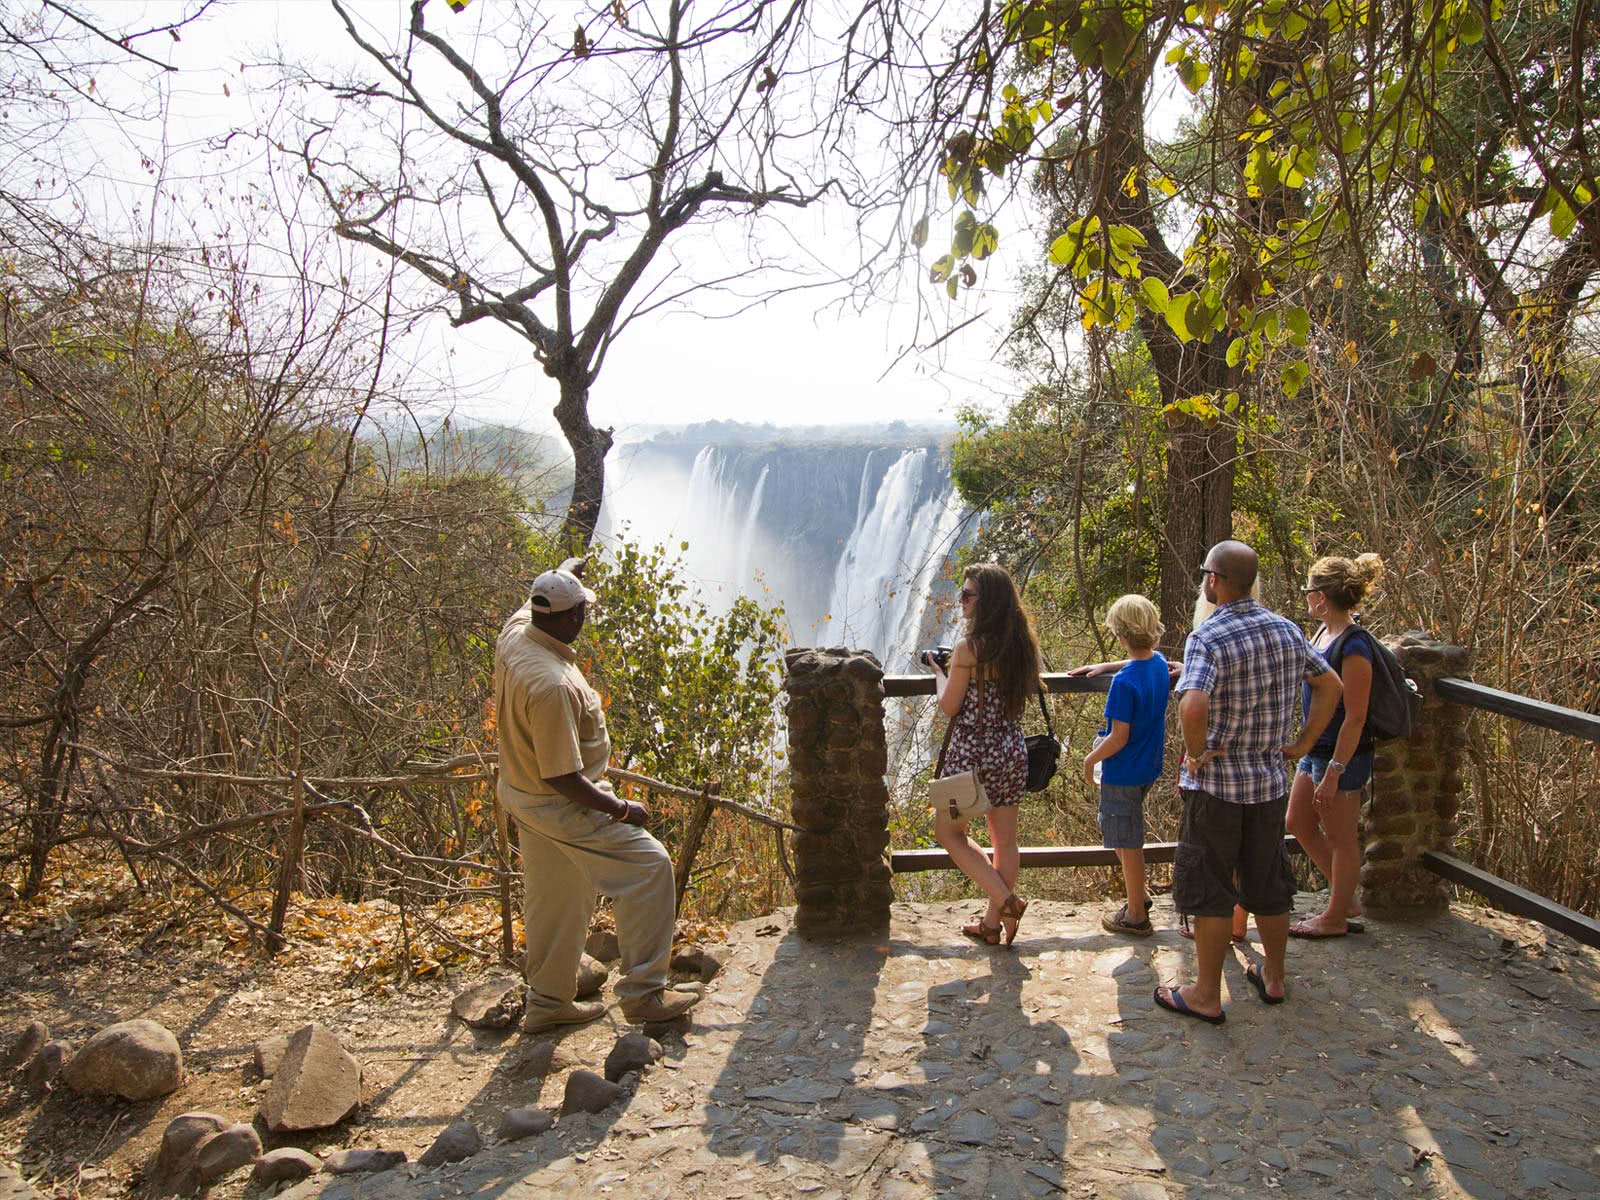 Guide leading a group of tourists on a tour of the Victoria Falls